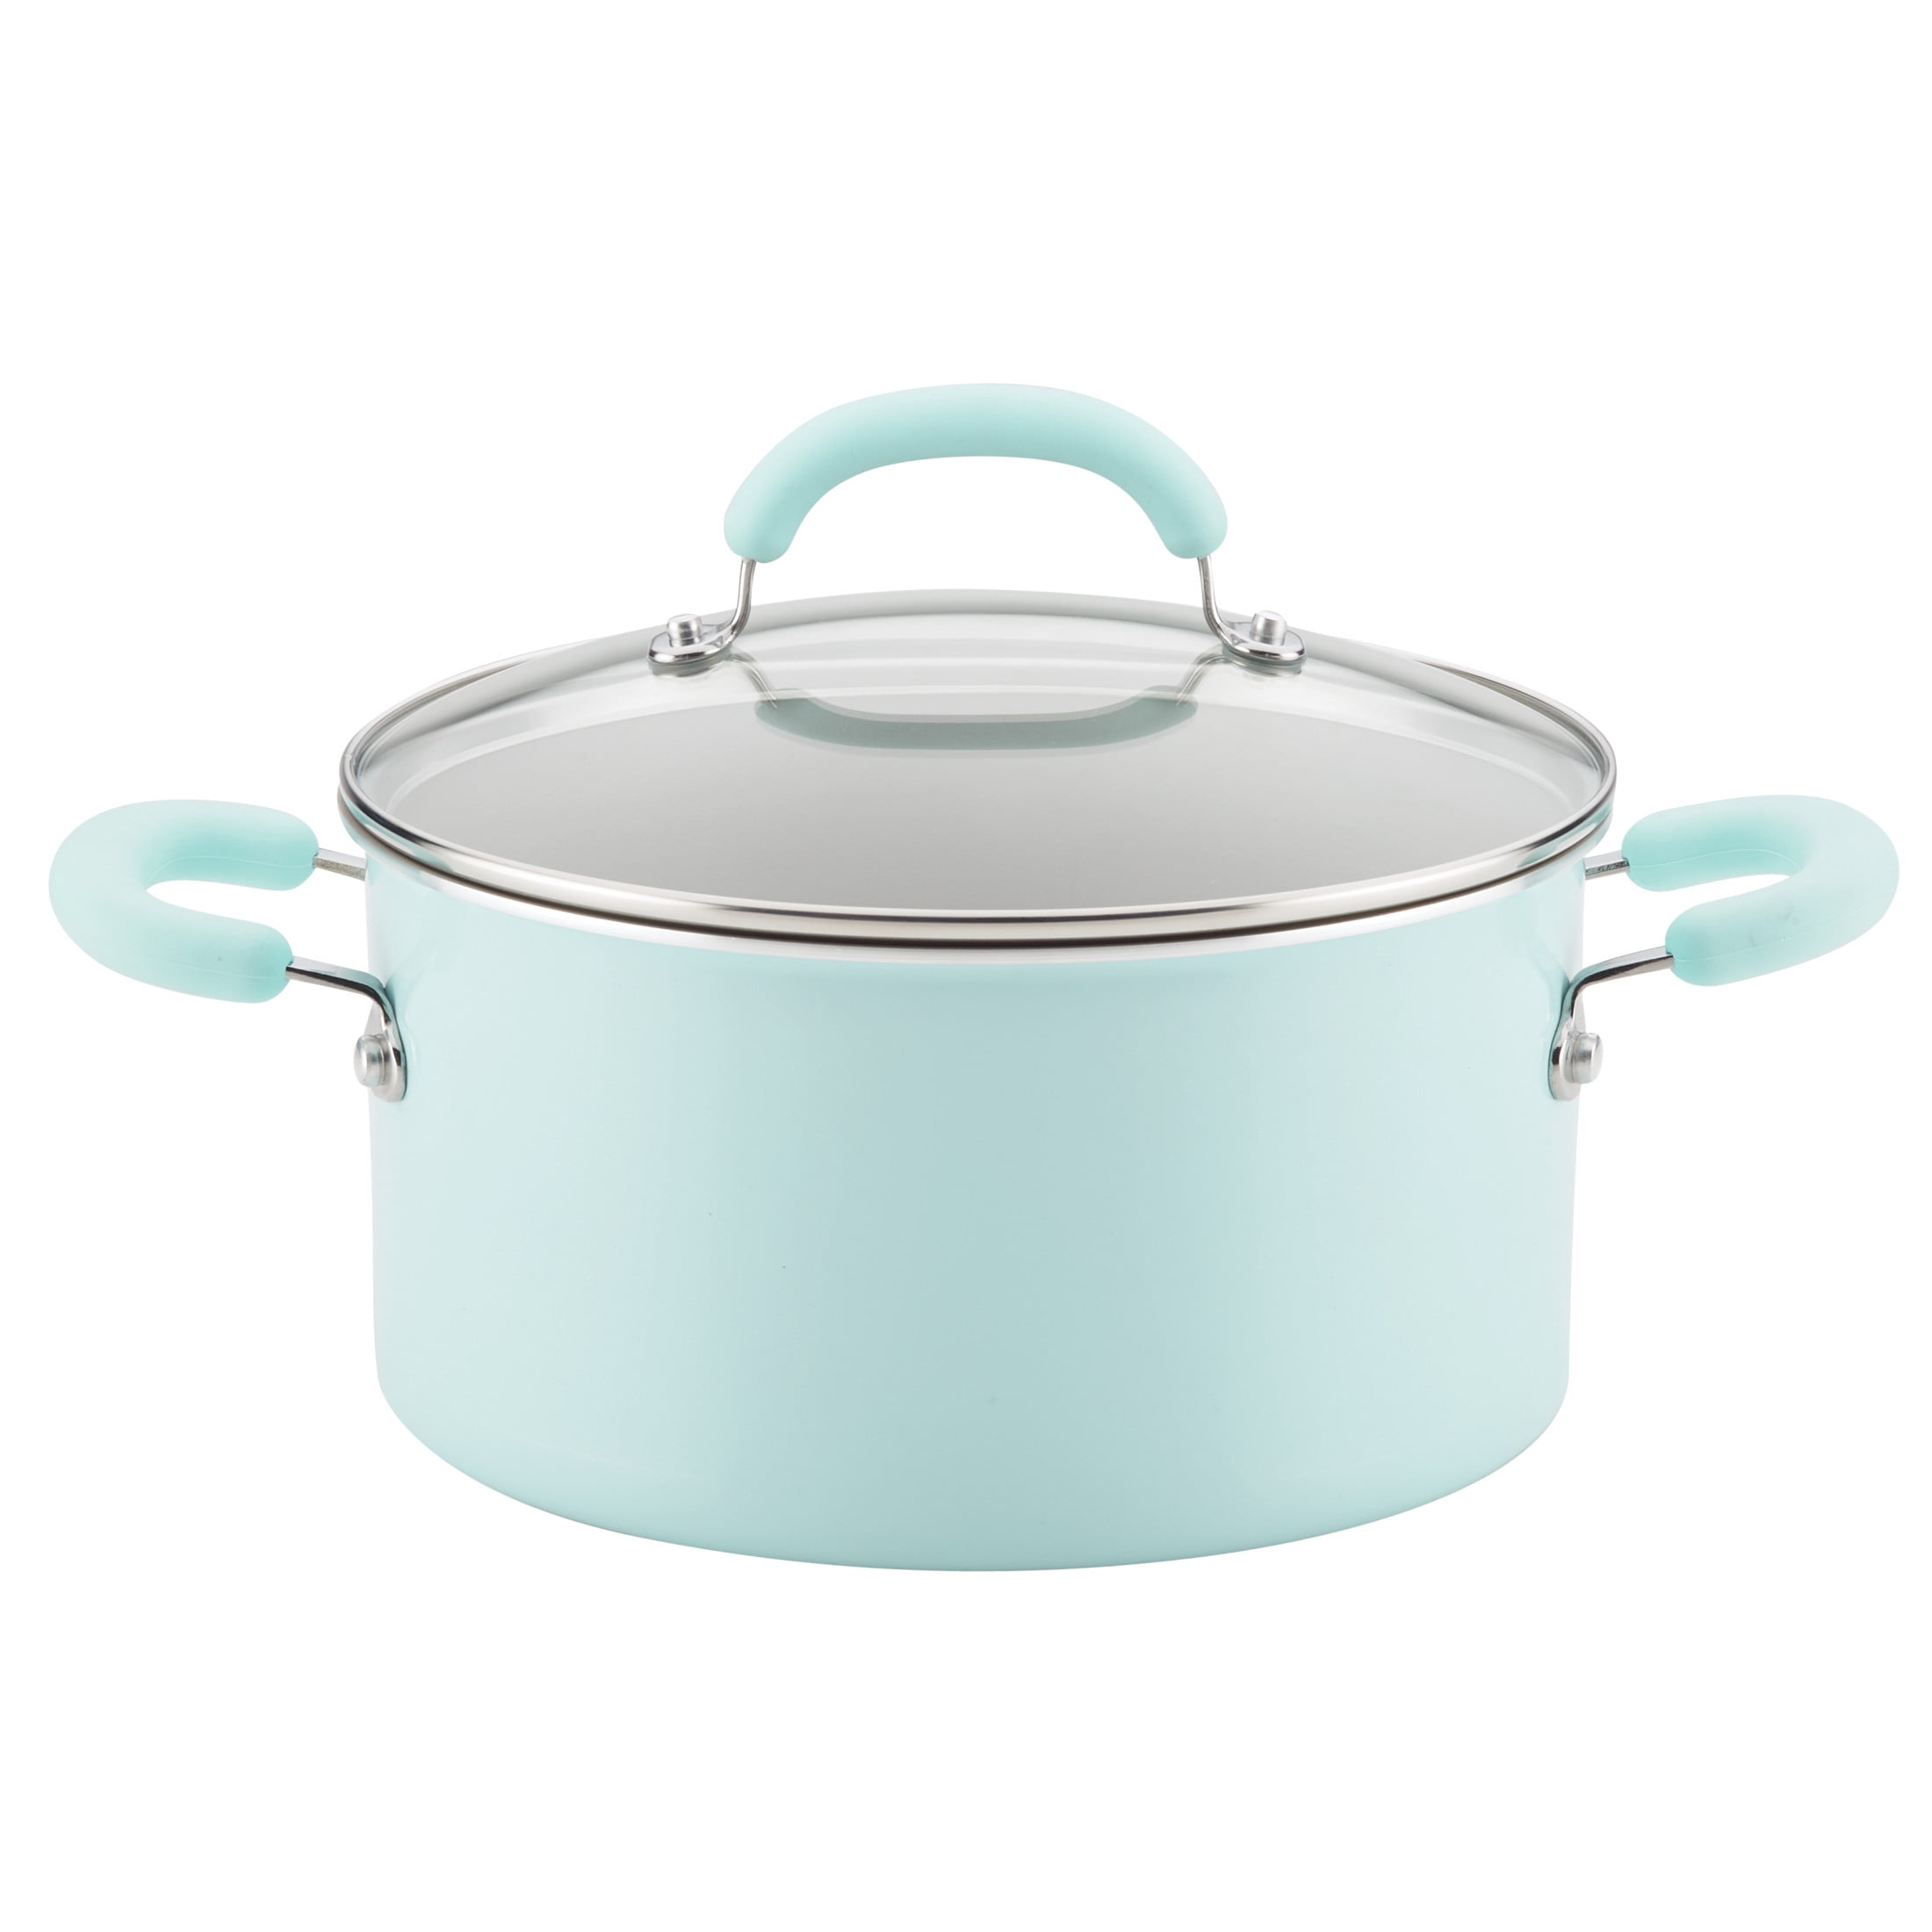 Eternal Living Nonstick Stock Pot Stainless Steel and Ceramic Infused Cooking Pot with Lid, Blue 4.5 qt